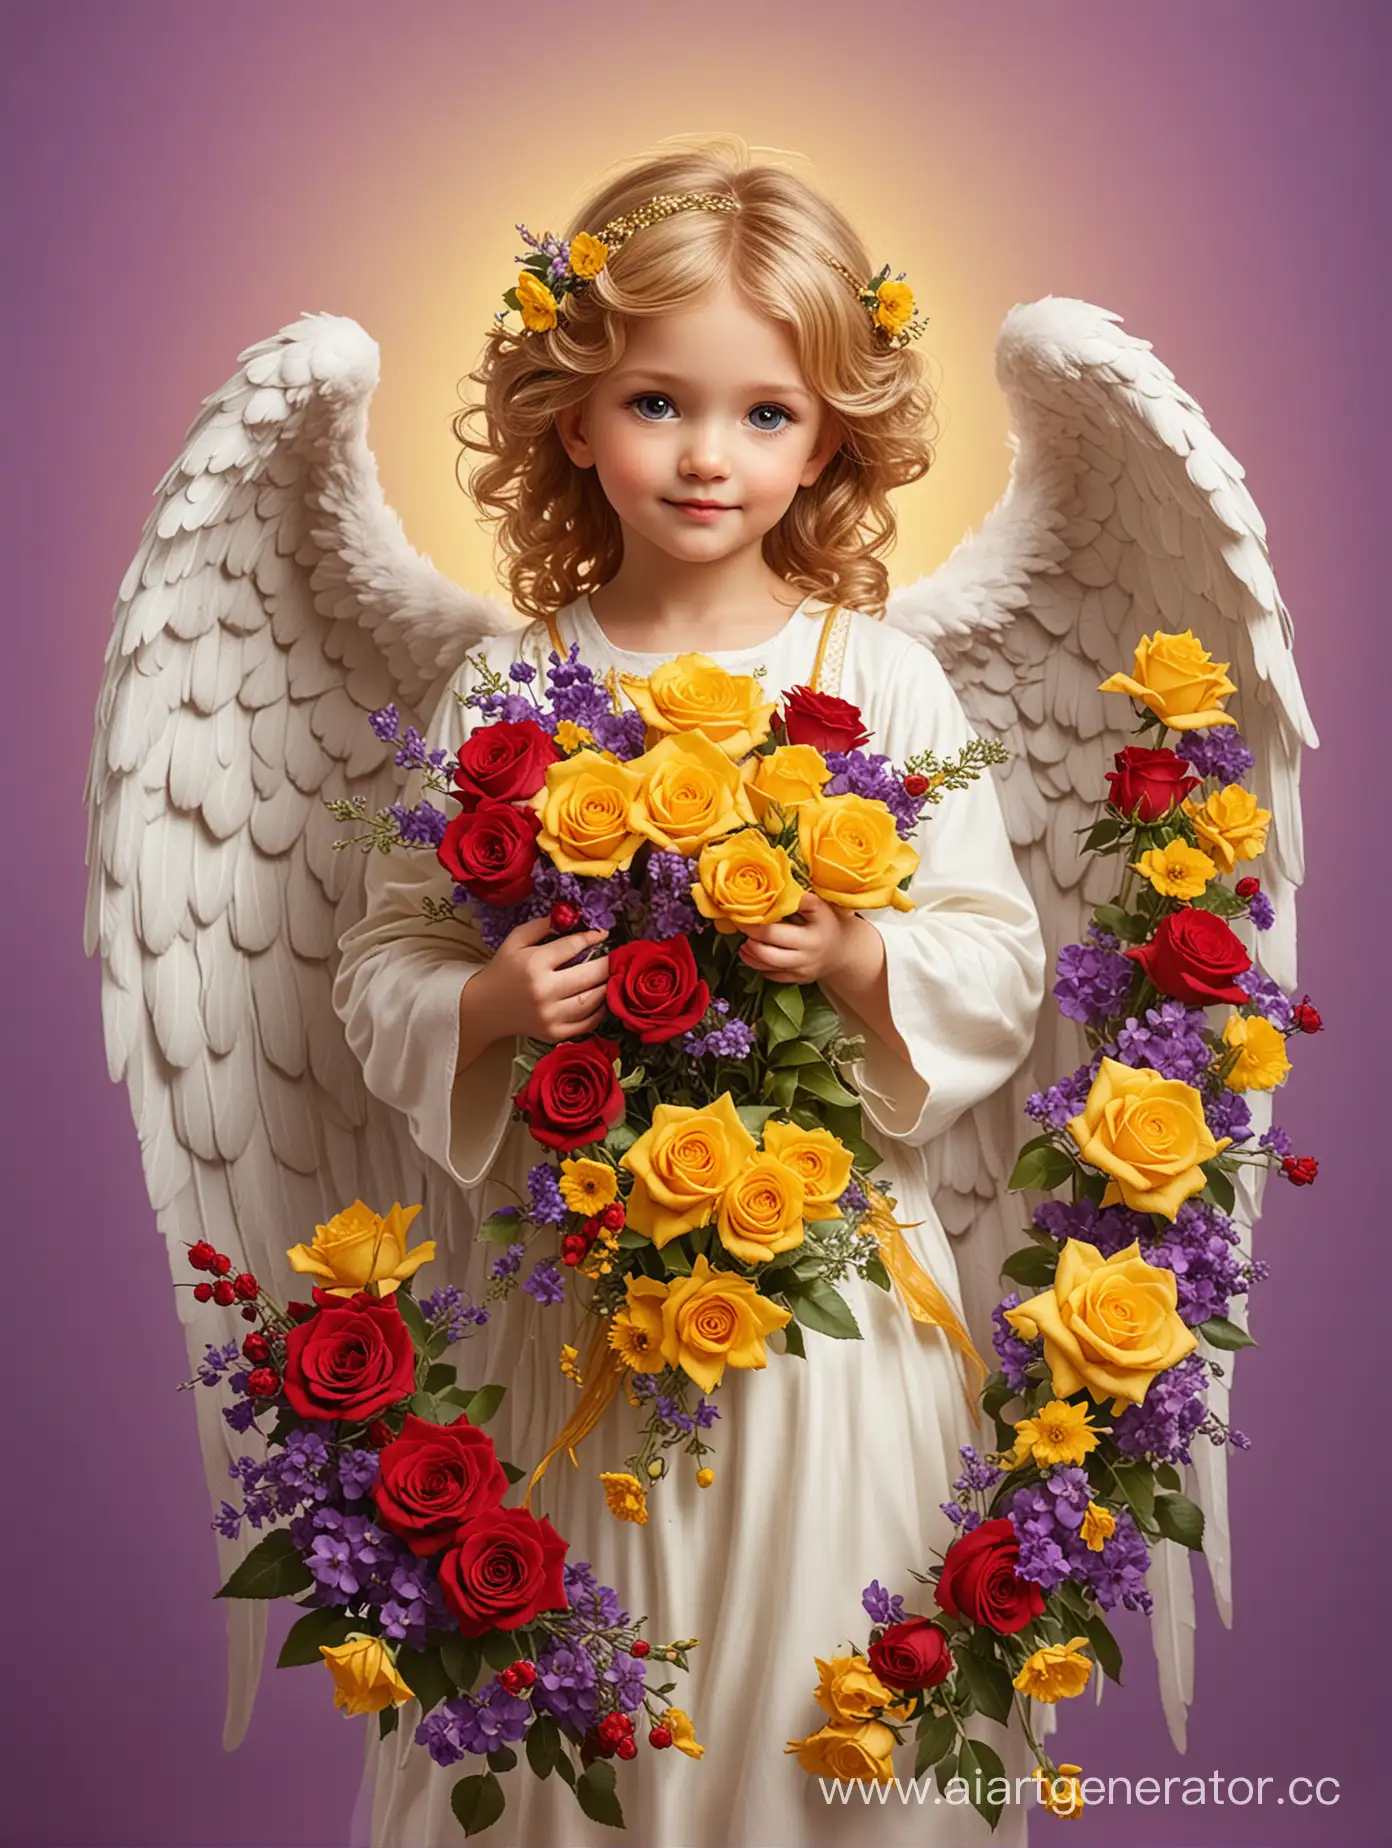 cute angel with a bouquet of beautiful unusual flowers, red roses, yellow-purple background 